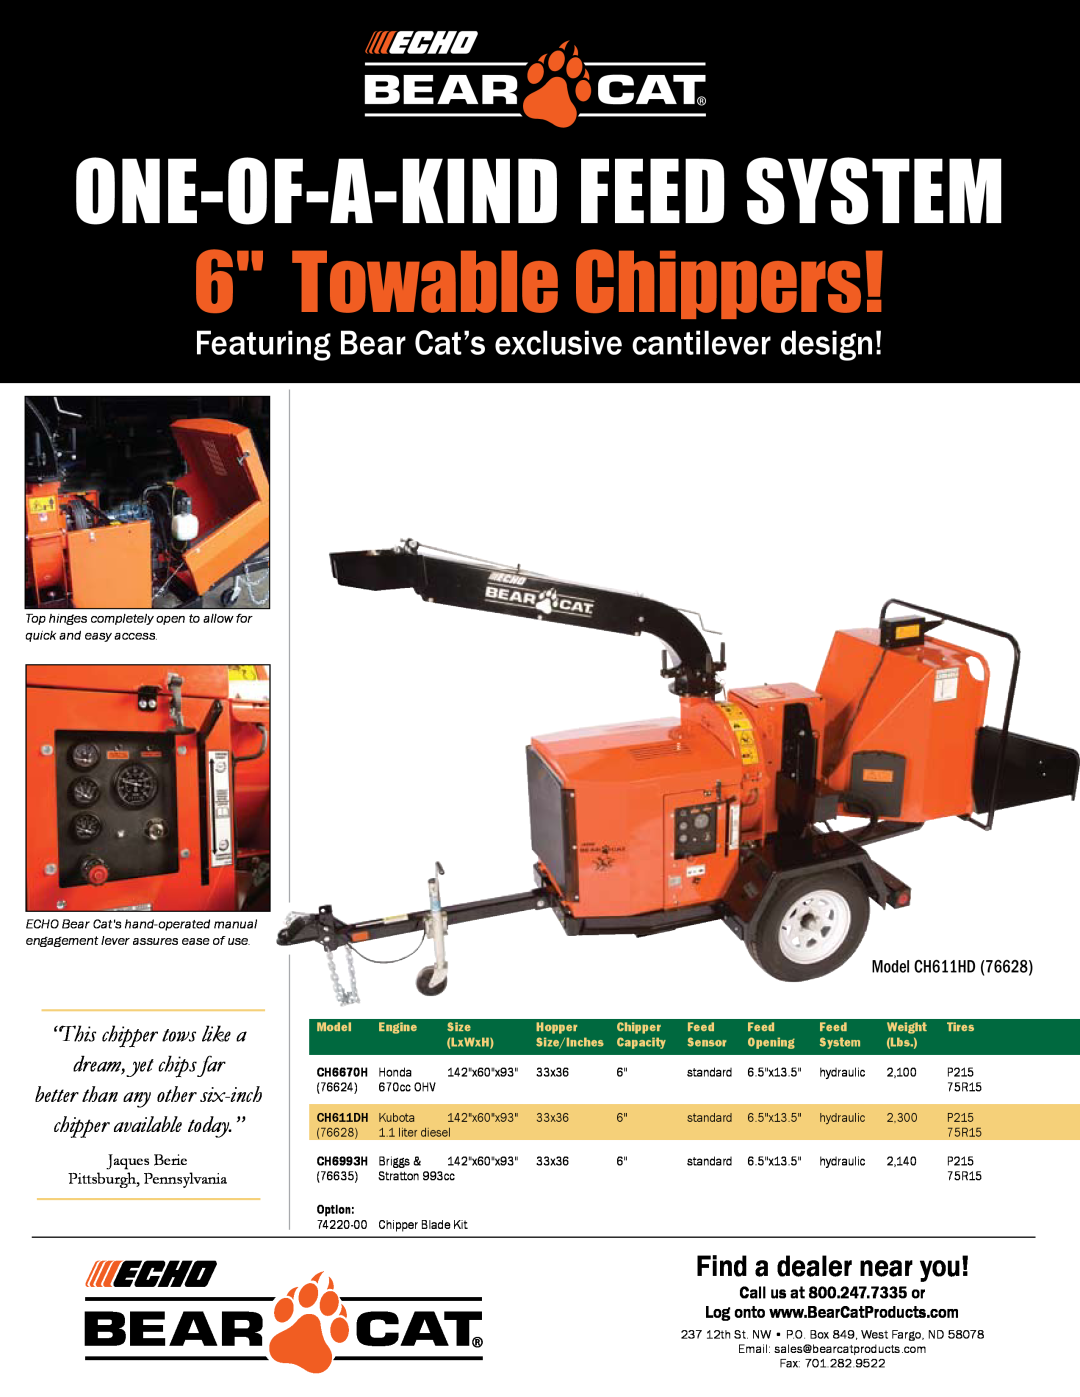 Echo Bear Cat CH6670H (76624) manual Find a dealer near you, Call us at 800.247.7335 or, One-of-a-KIND FEED SYSTEM, Model 